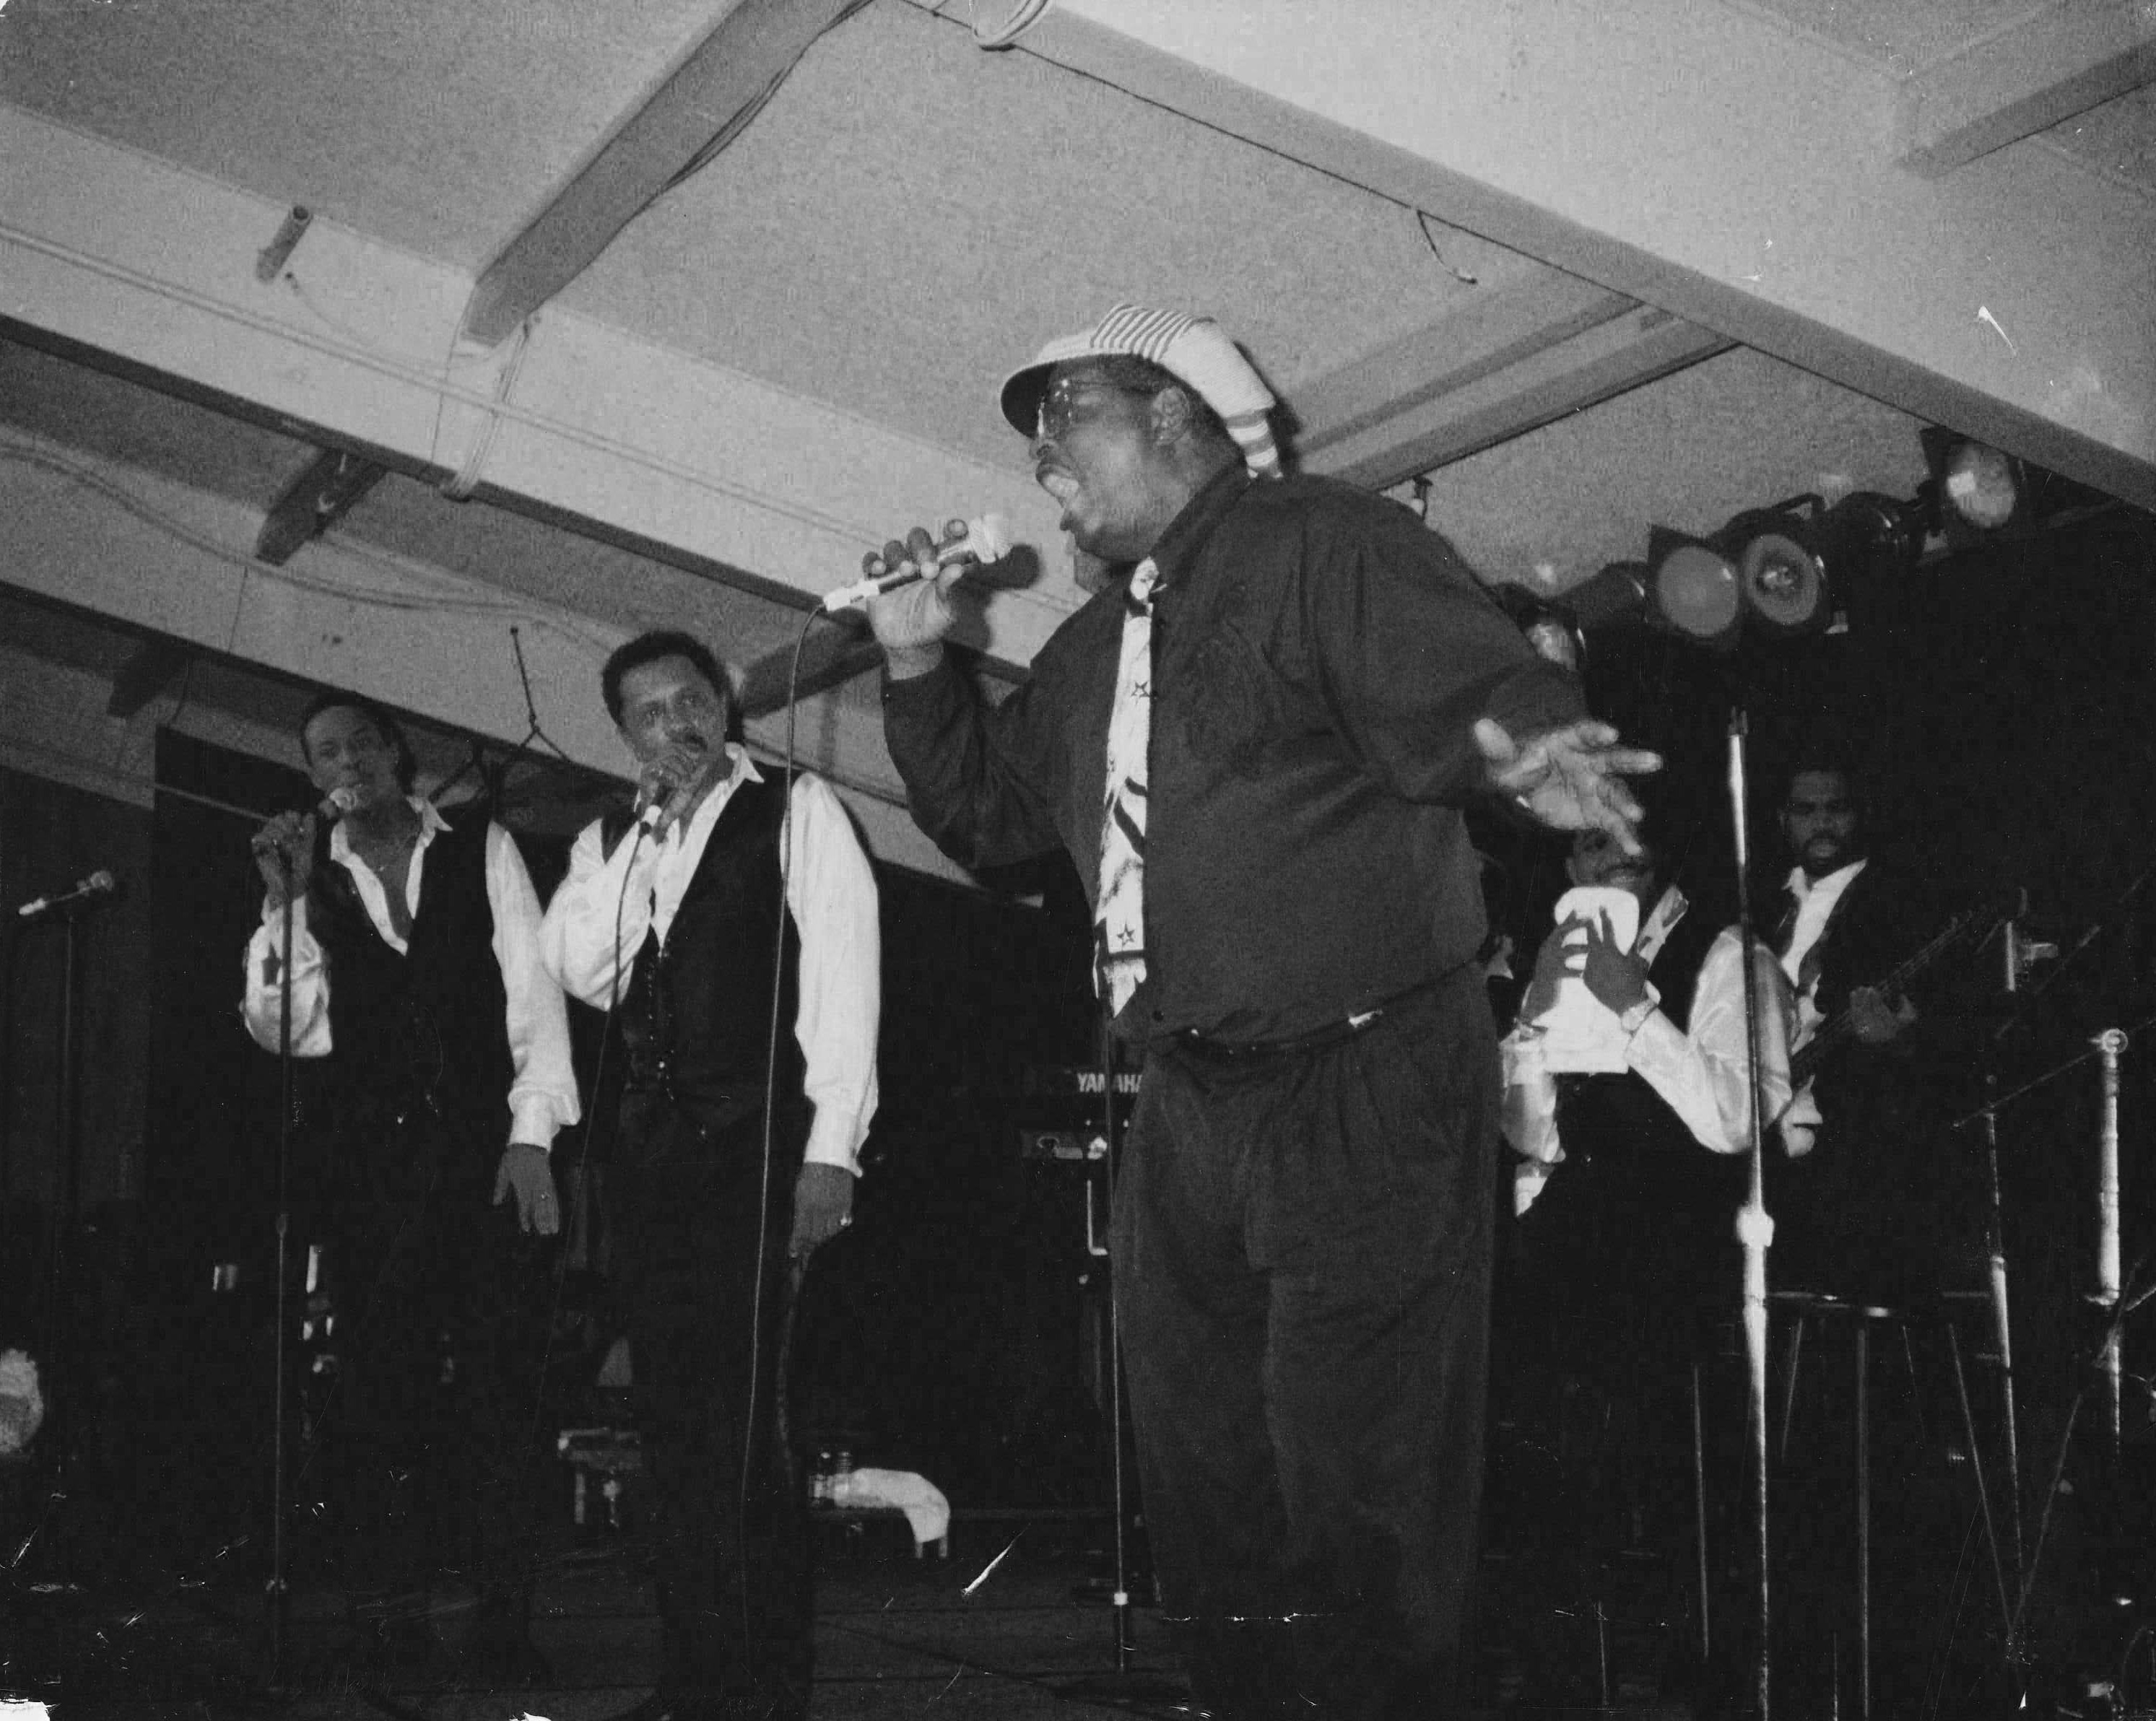 Jerry B. Bowden performing on stage with the Temptations